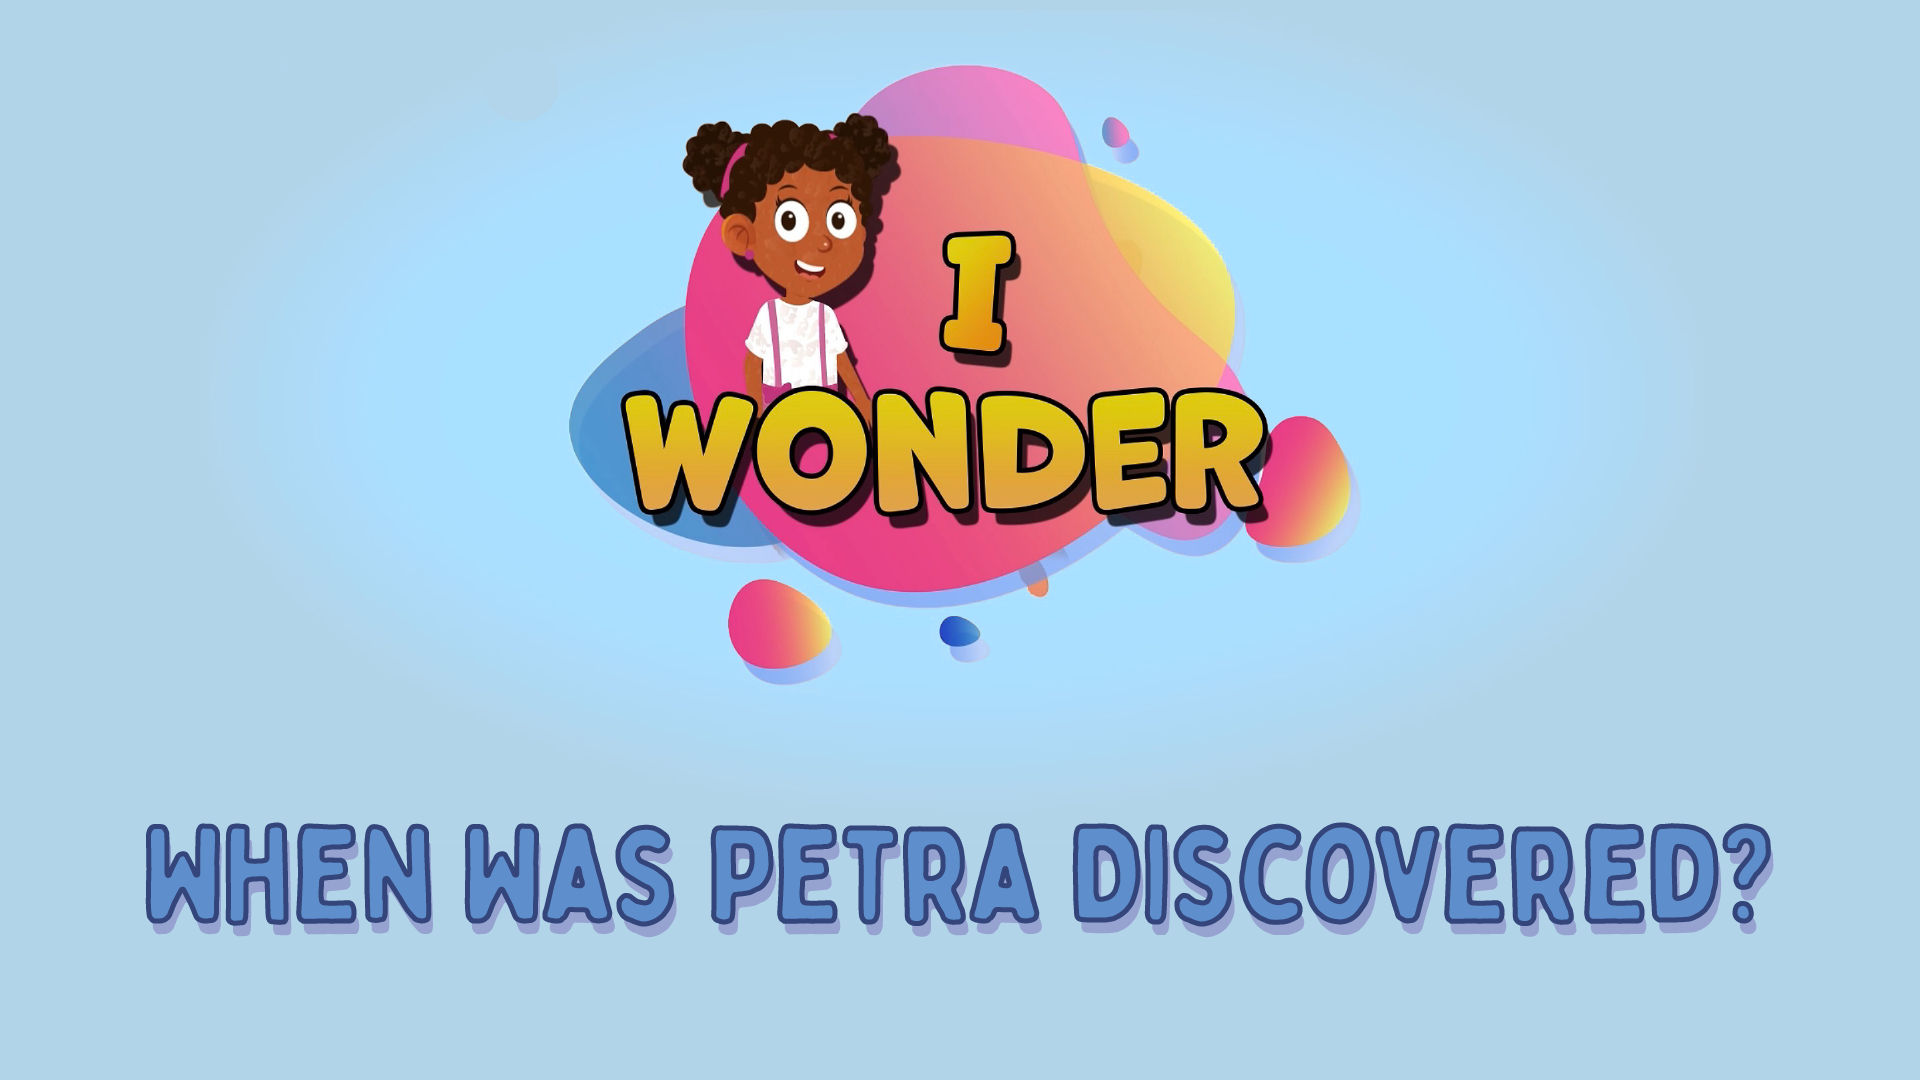 When Was Petra Discovered?